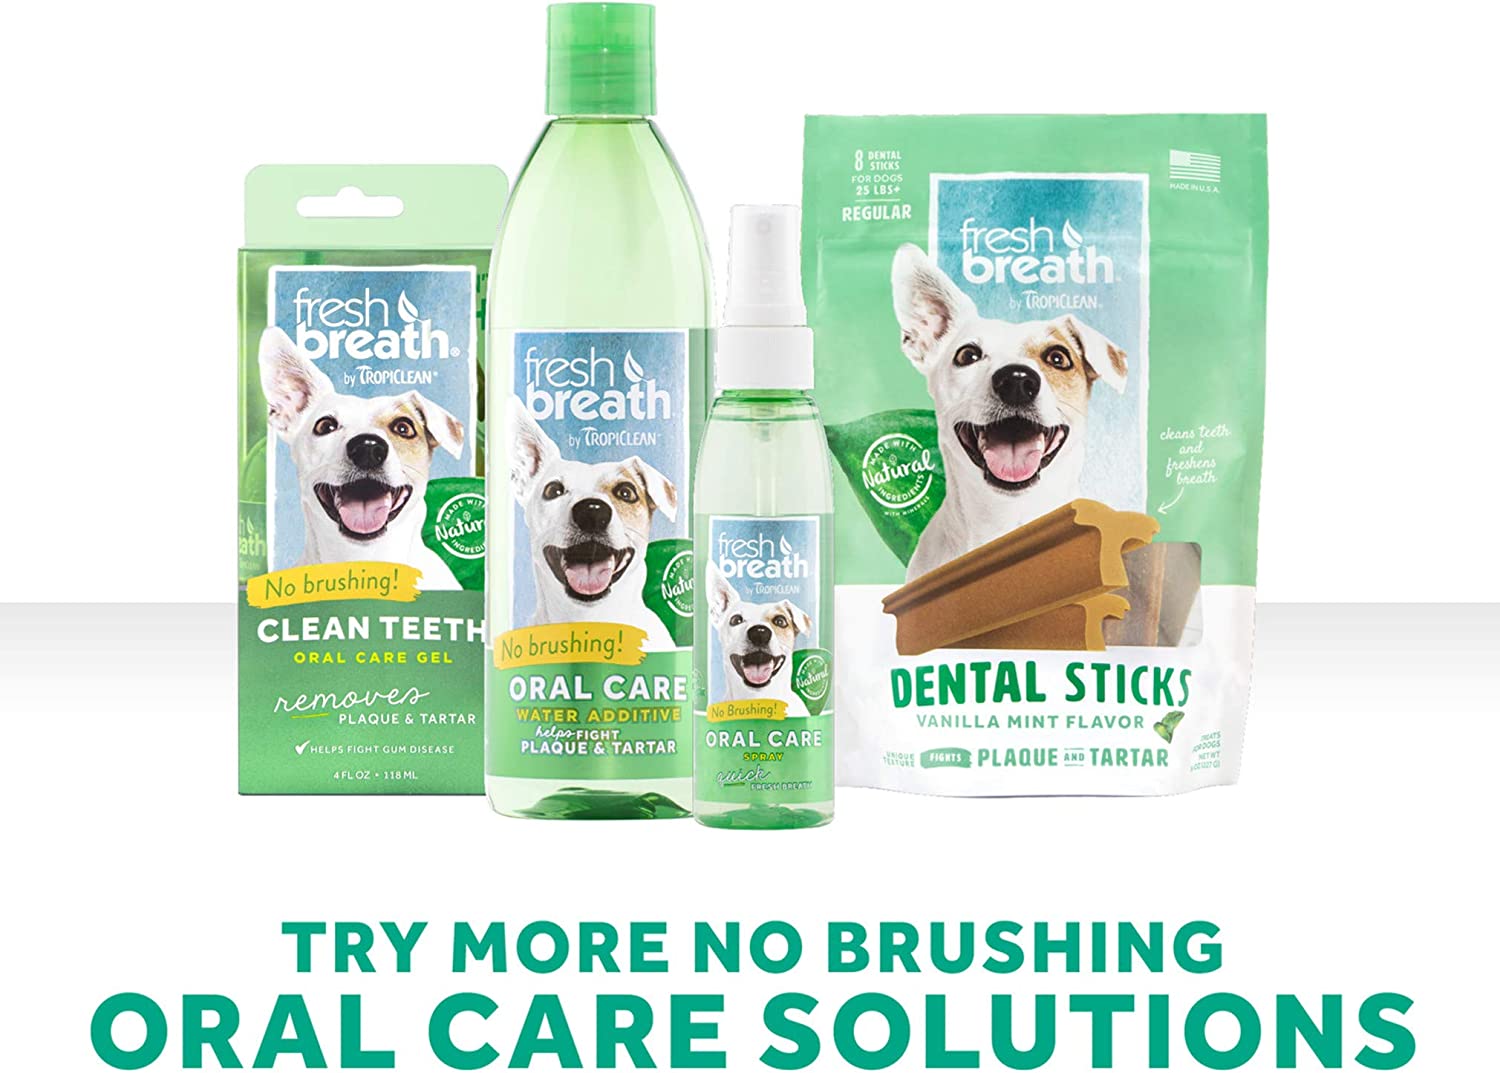 Fresh Breath by TropiClean Berry Oral Care Spray for Dogs, 4oz - Made in USA